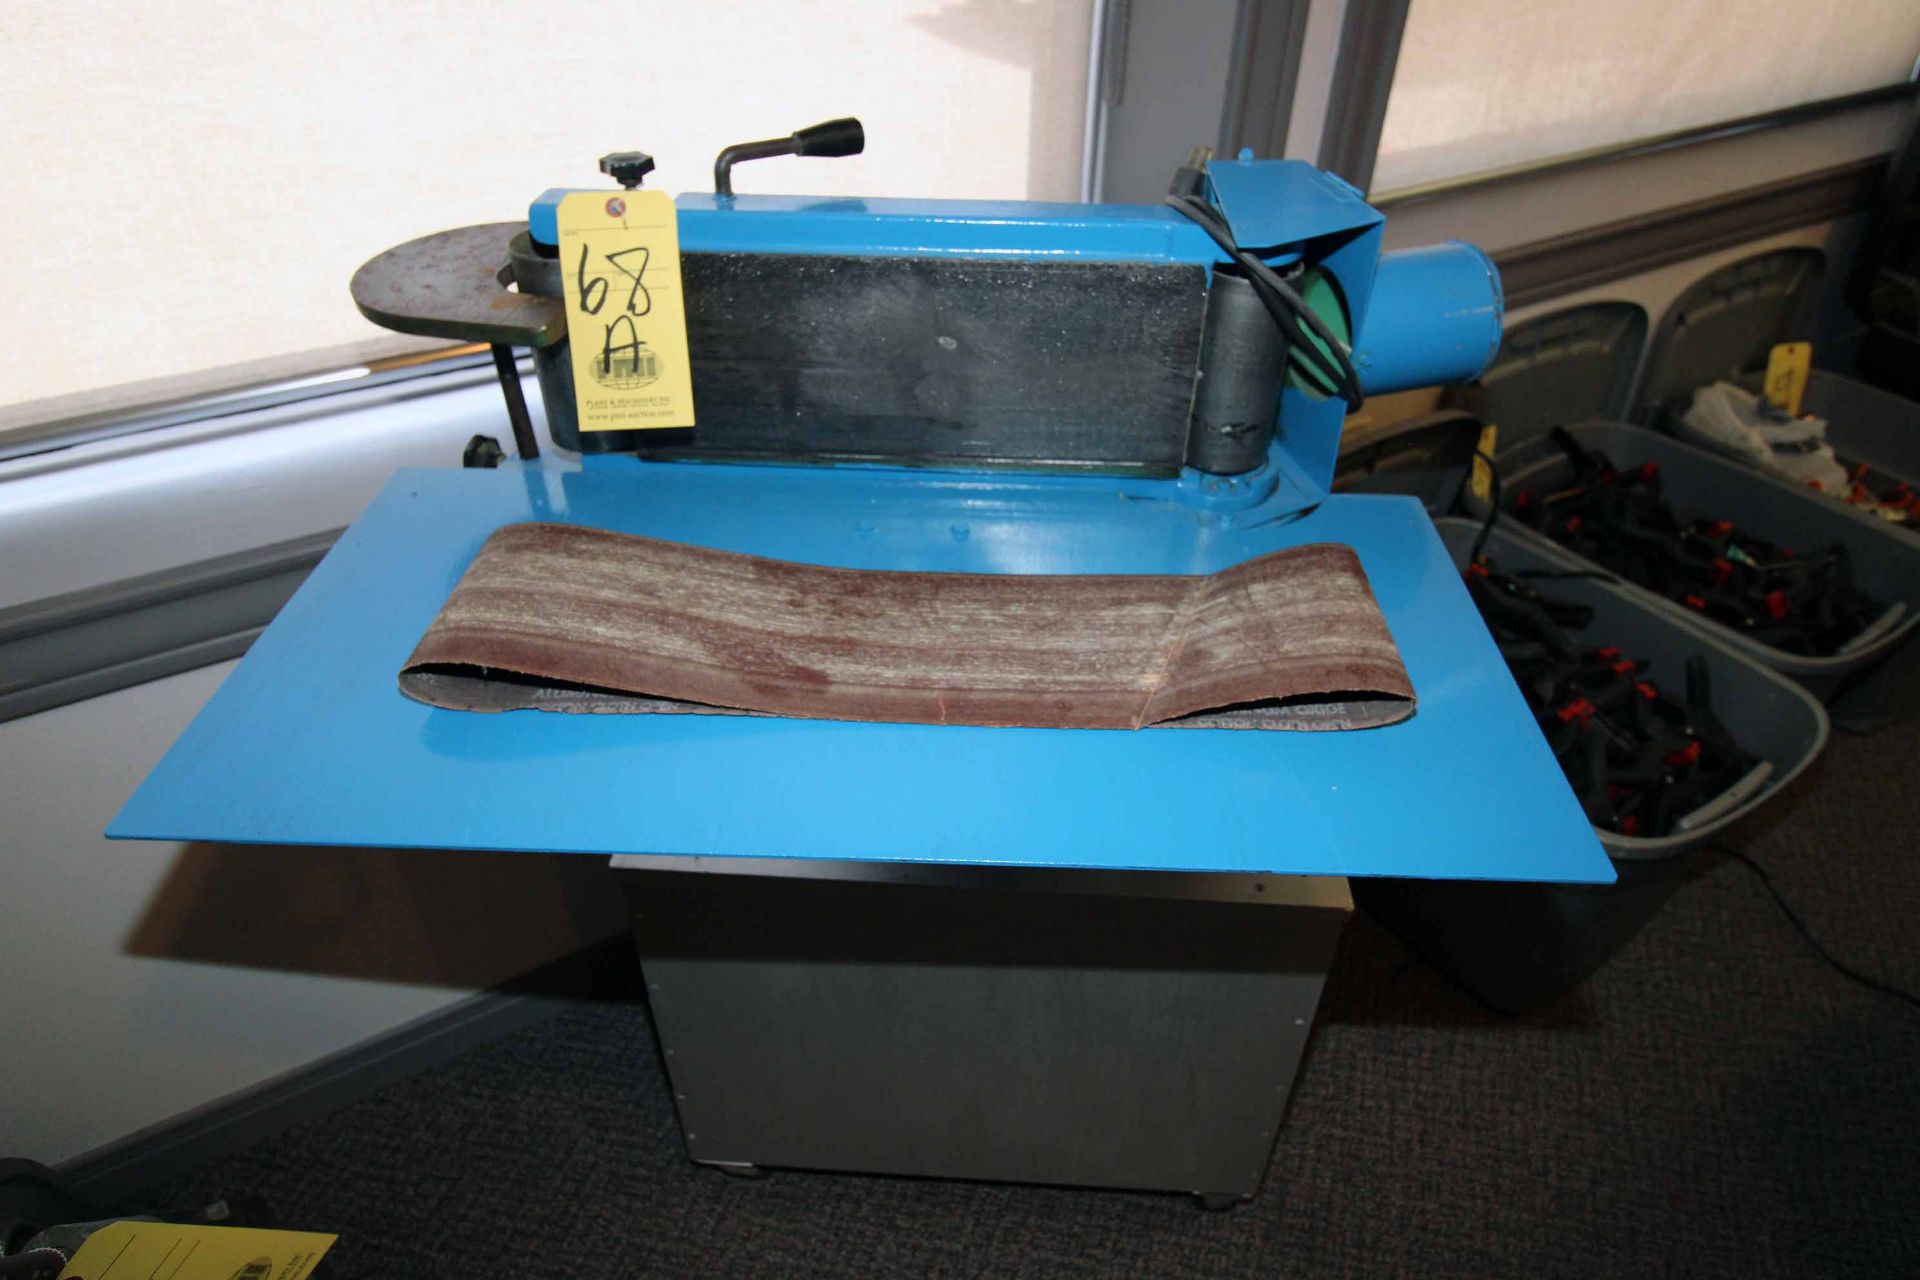 BELT SANDER, 6' x 24", 3/4 HP motor, on rolling cart (Located at: Offshore Clamps & Protectors,